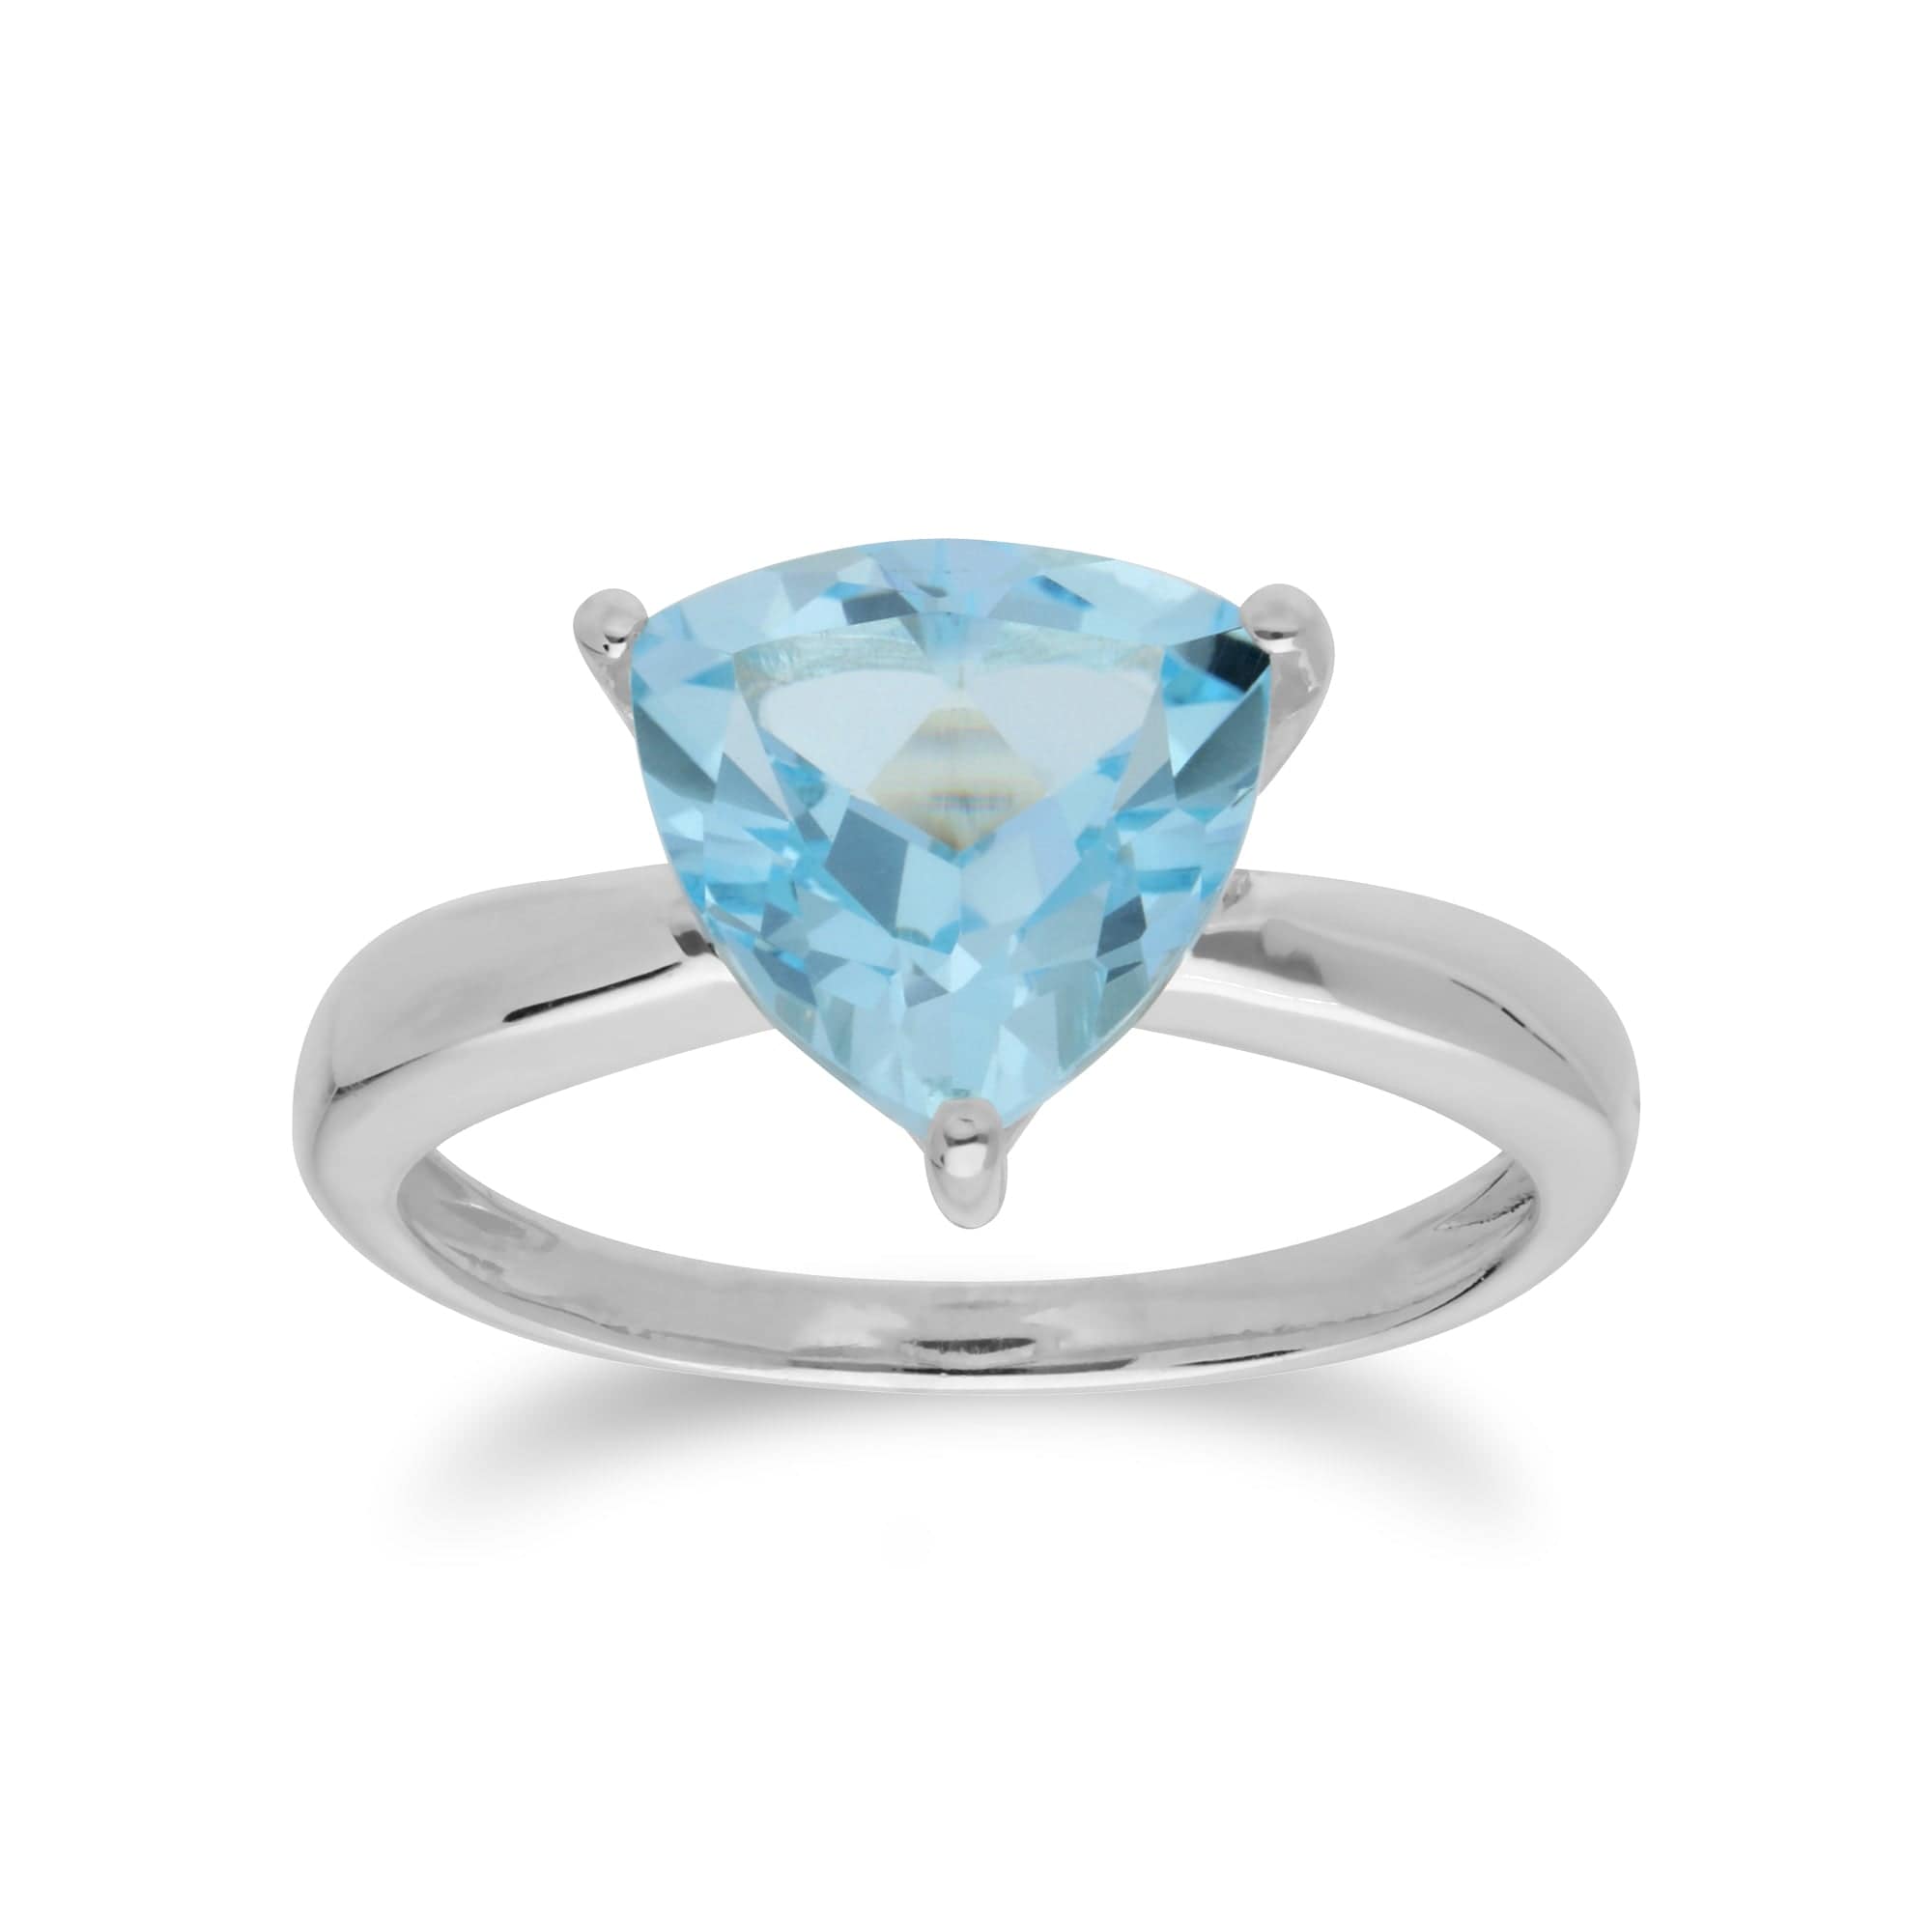 253R366302925 Geometric Trillion Blue Topaz Triangle Prism Ring in 925 Sterling Silver 1